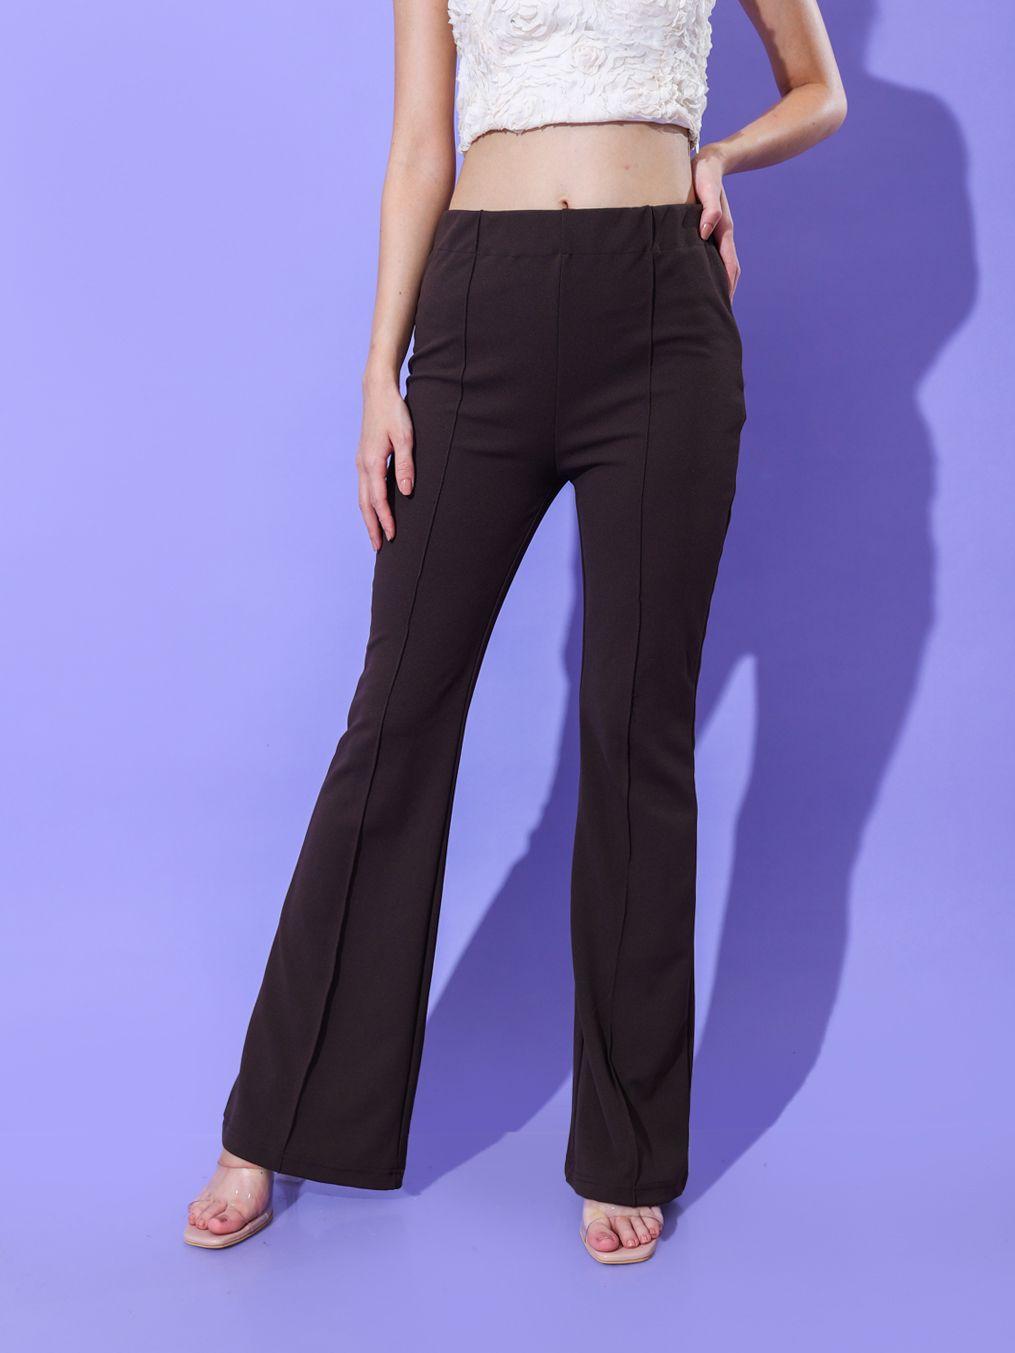 stylecast-x-hersheinbox-high-rise-boot-cut-trousers